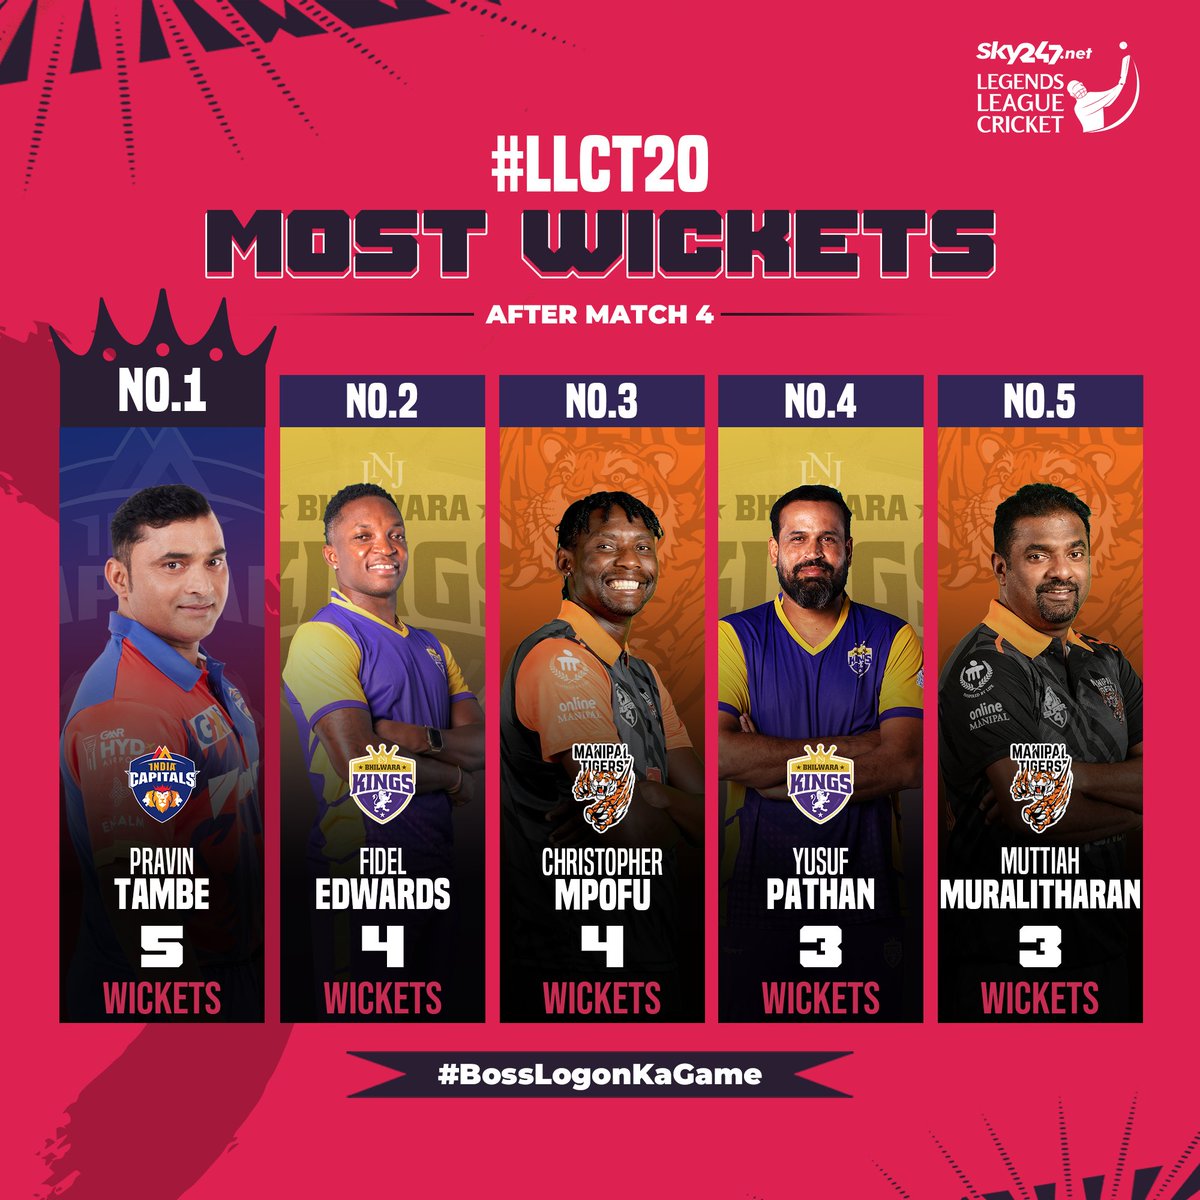 Make way for the #legendary wicket-takers of the tournament! @legytambe of @CapitalsIndia is dominating the points tally with 5 wickets, followed by @EdwardsFidel of @Bhilwarakings with 4 wickets. The game is just getting fearsome! #LegendsLeagueCricket #LLCT20 #BossLogonKaGame